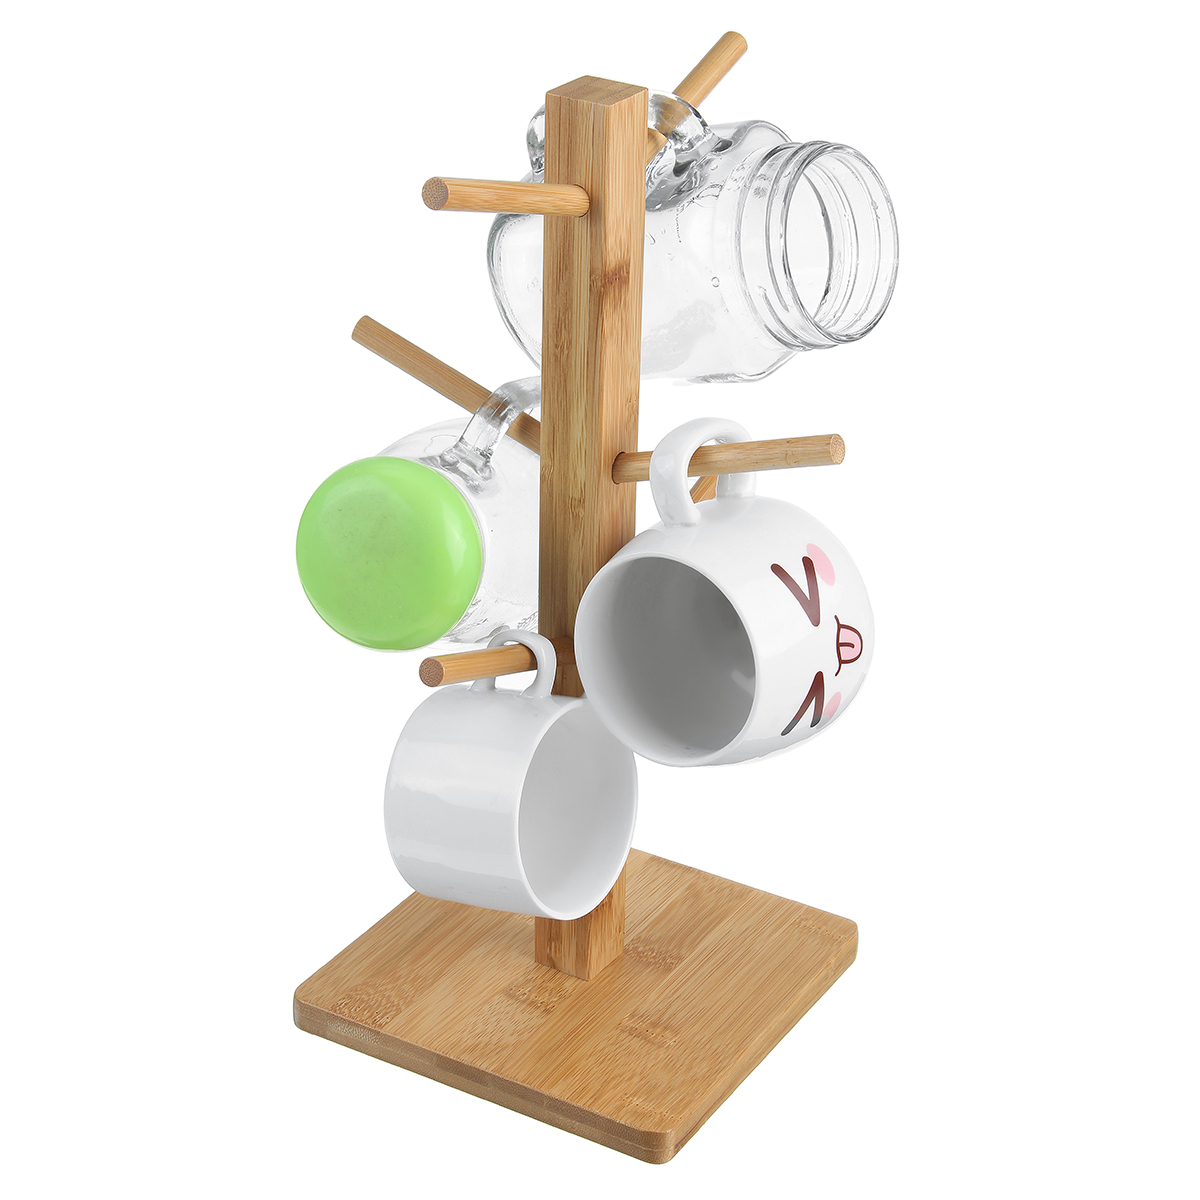 Wooden-Cup-Holder-Teacup-Mug-Drain-Rack-Stand-6-Cups-Drain-Cup-Hanging-Stand-Coffee-Cup-Display-Stan-1777089-9